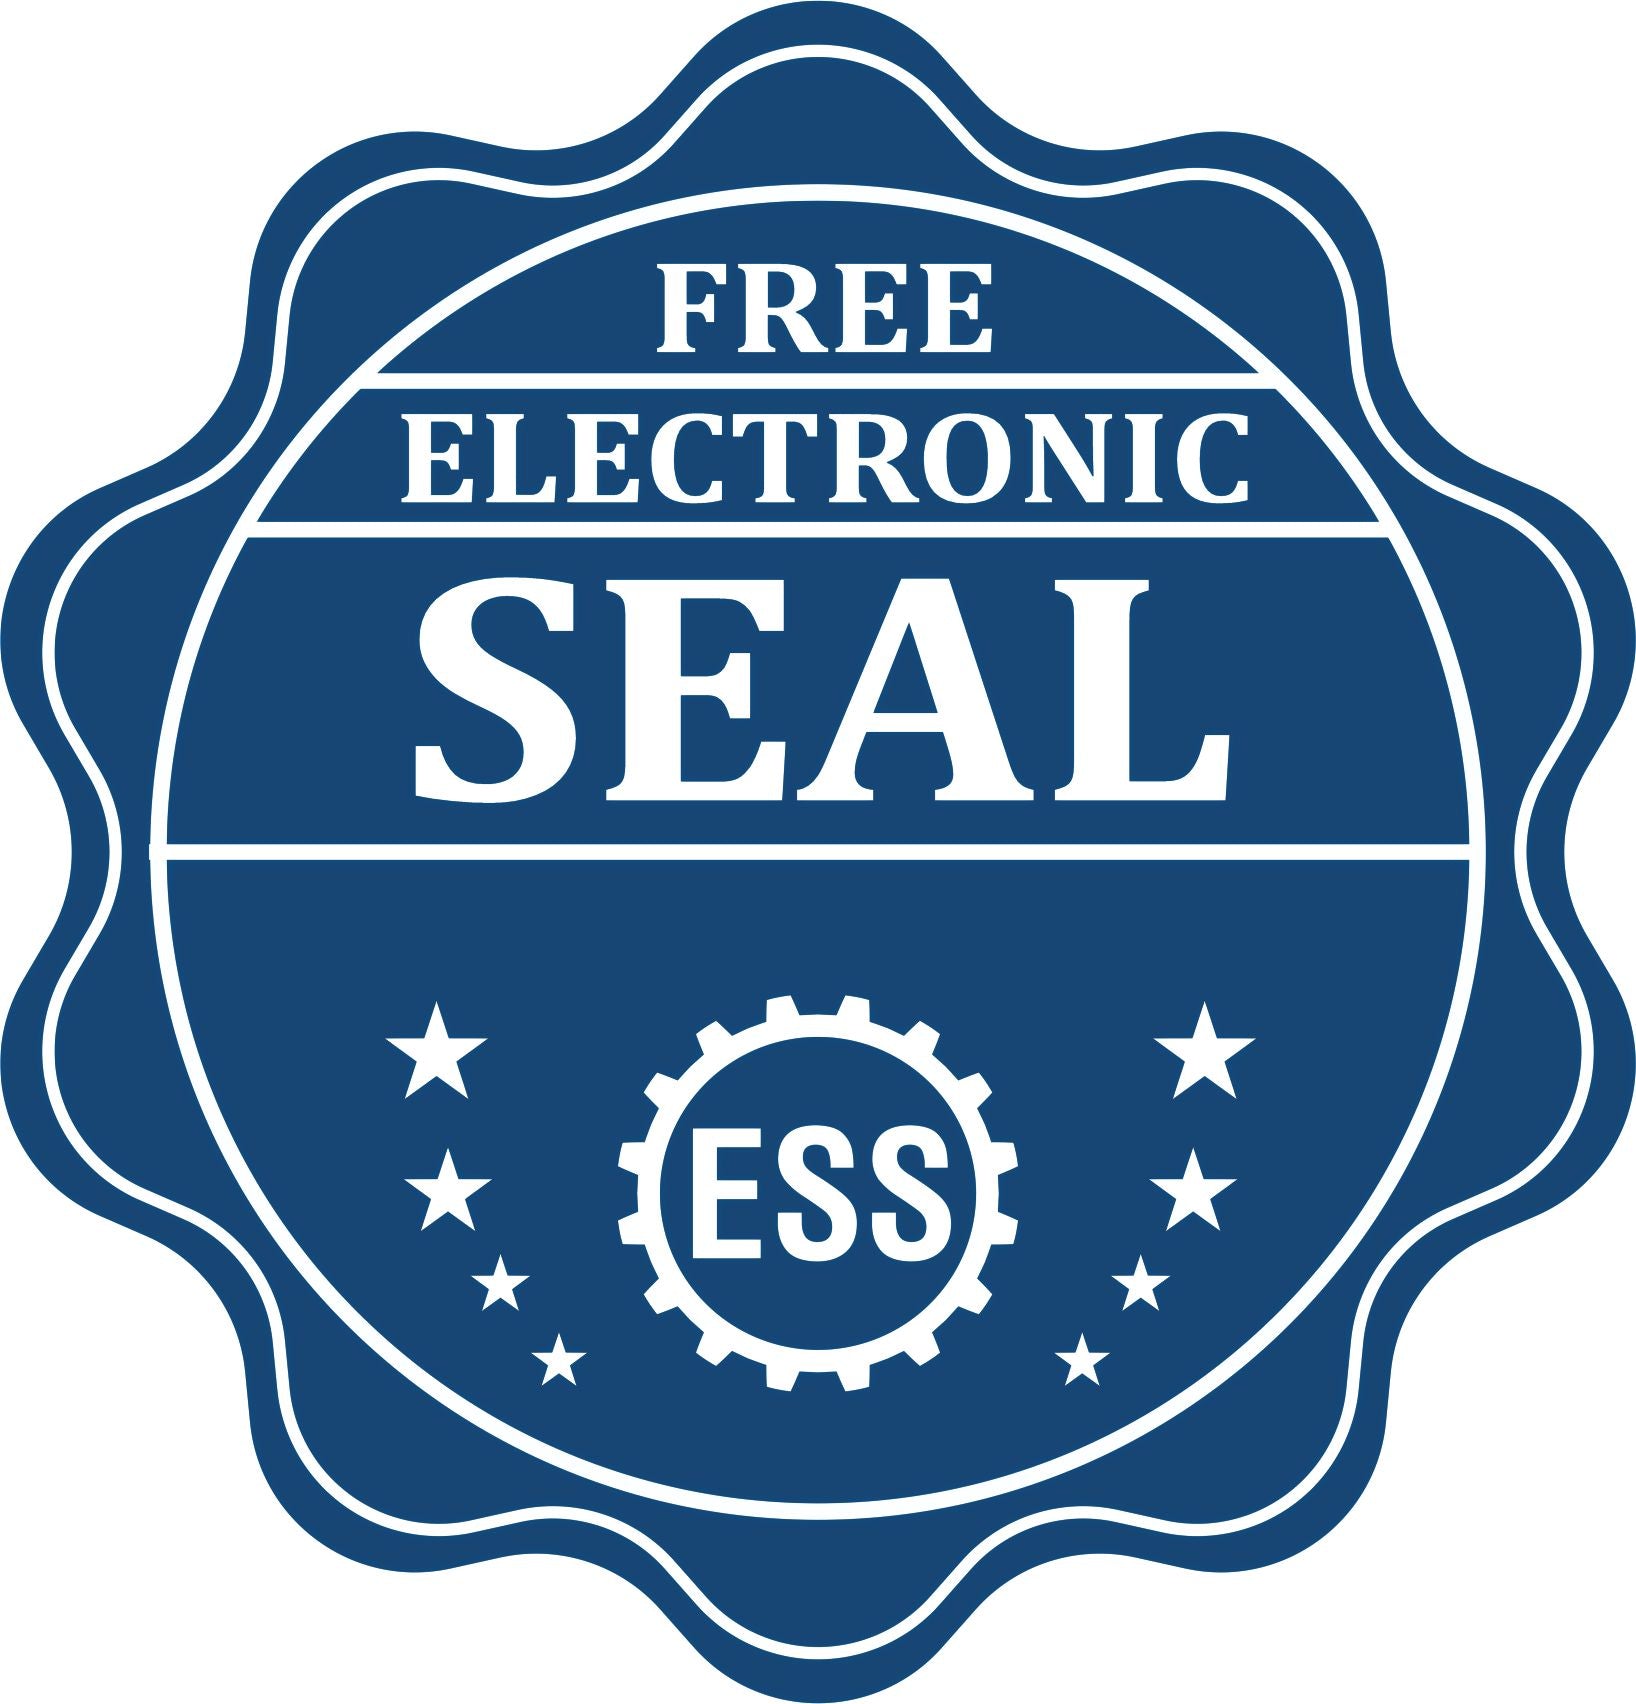 A badge showing a free electronic seal for the State of Utah Extended Long Reach Geologist Seal with stars and the ESS gear on the emblem.